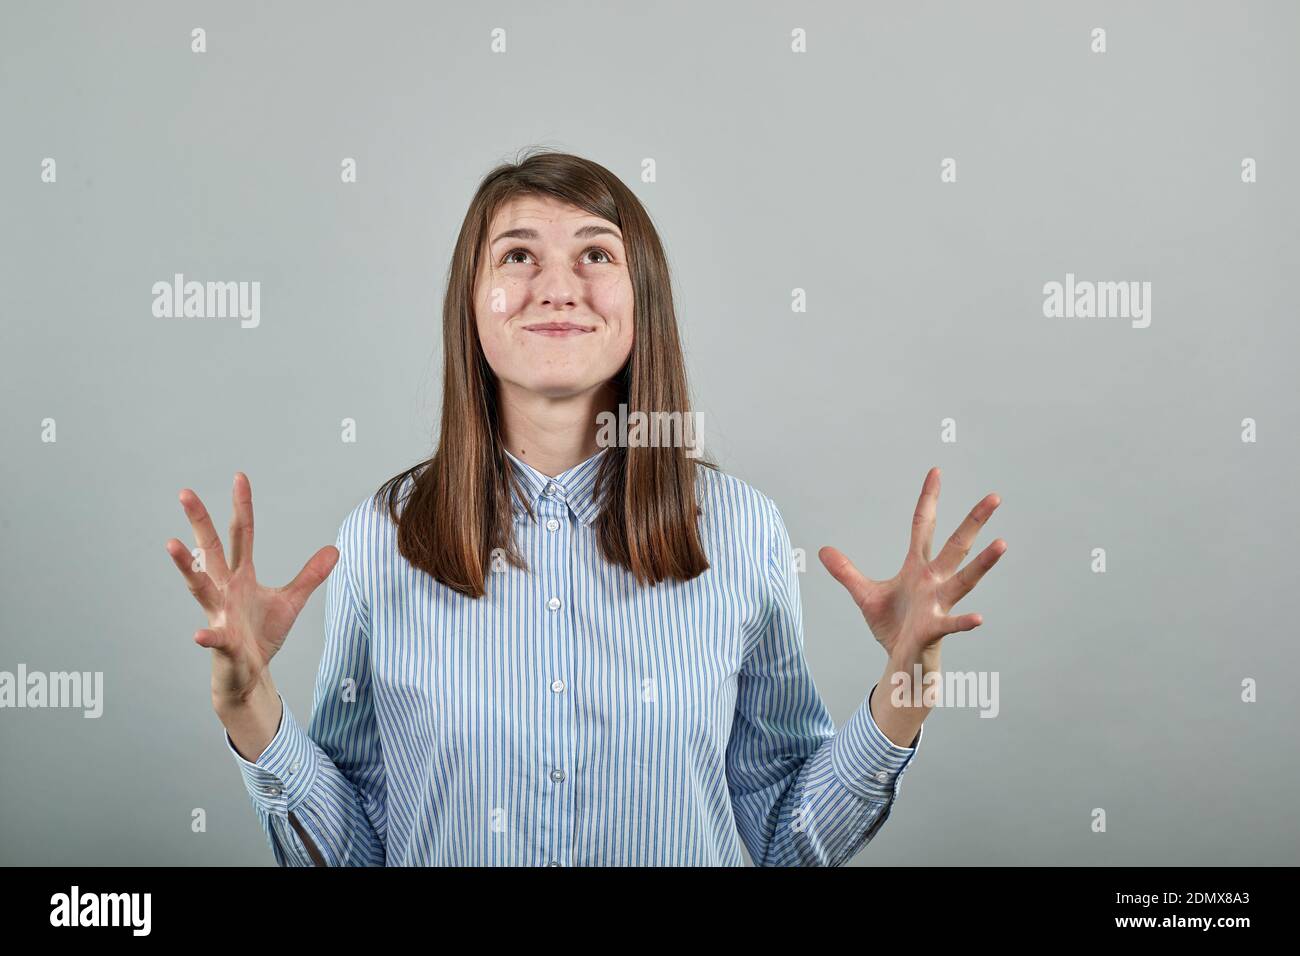 Palms up, place your product here, raising arms wide spread is catching something. Young attractive woman, dressed blue shirt with brown eyes, brunette hair, grey background Stock Photo